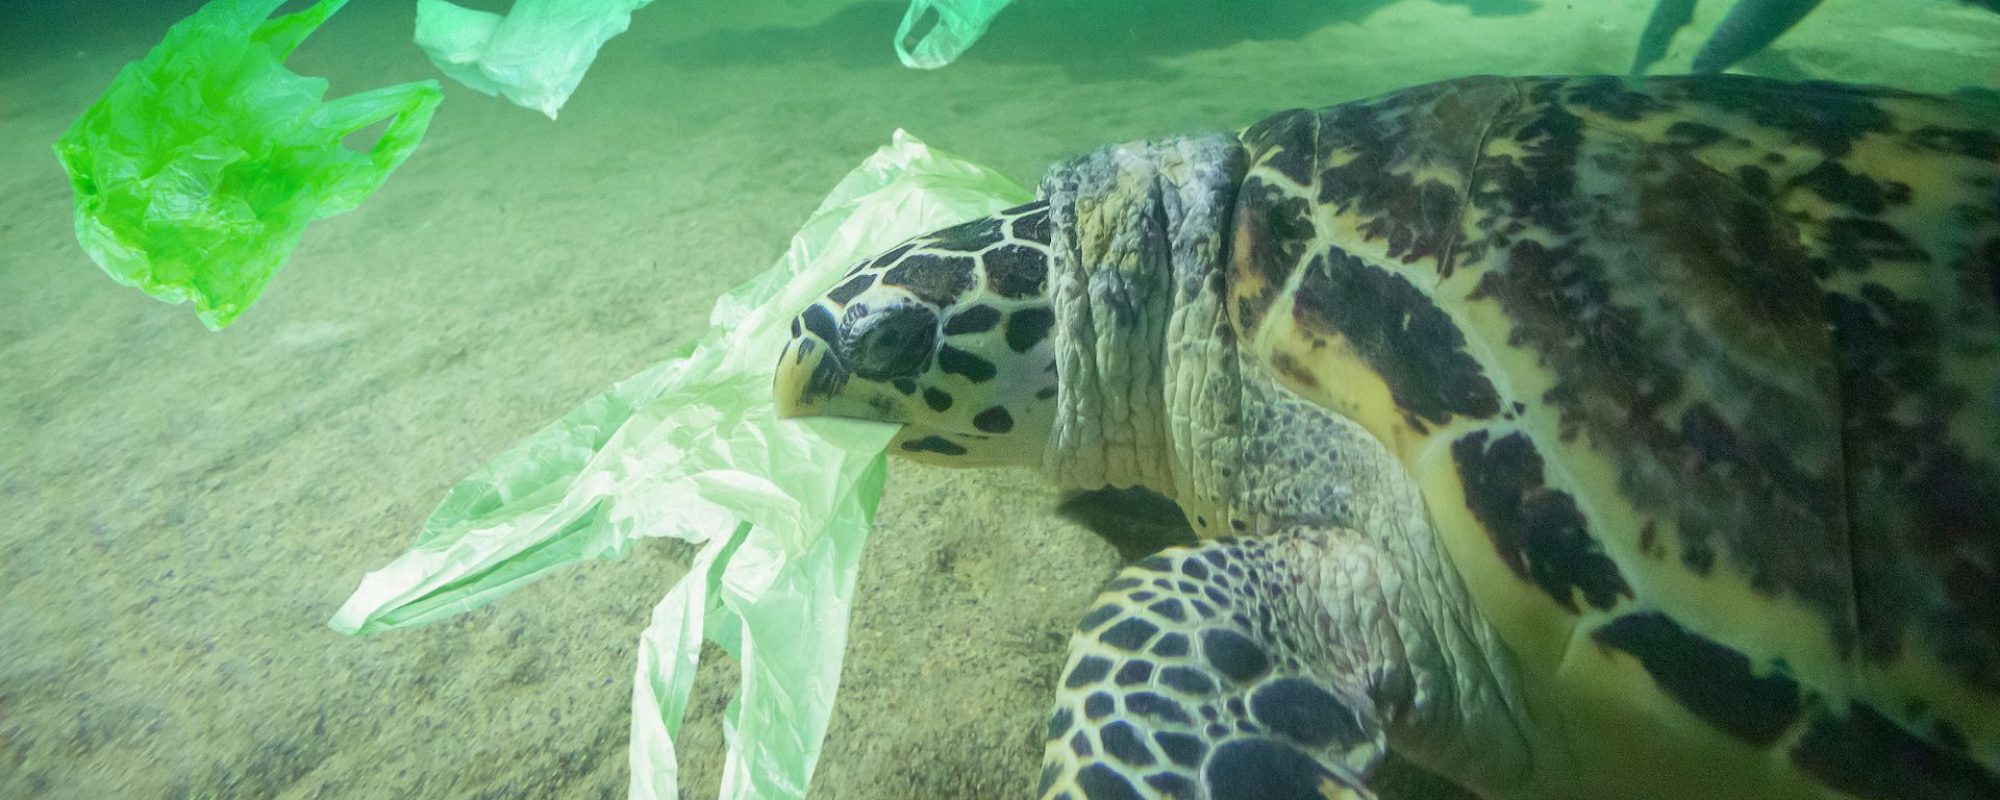 Turtle and plastic bags in ocea pollution - 100 Ways in 100 Days e-learning programme